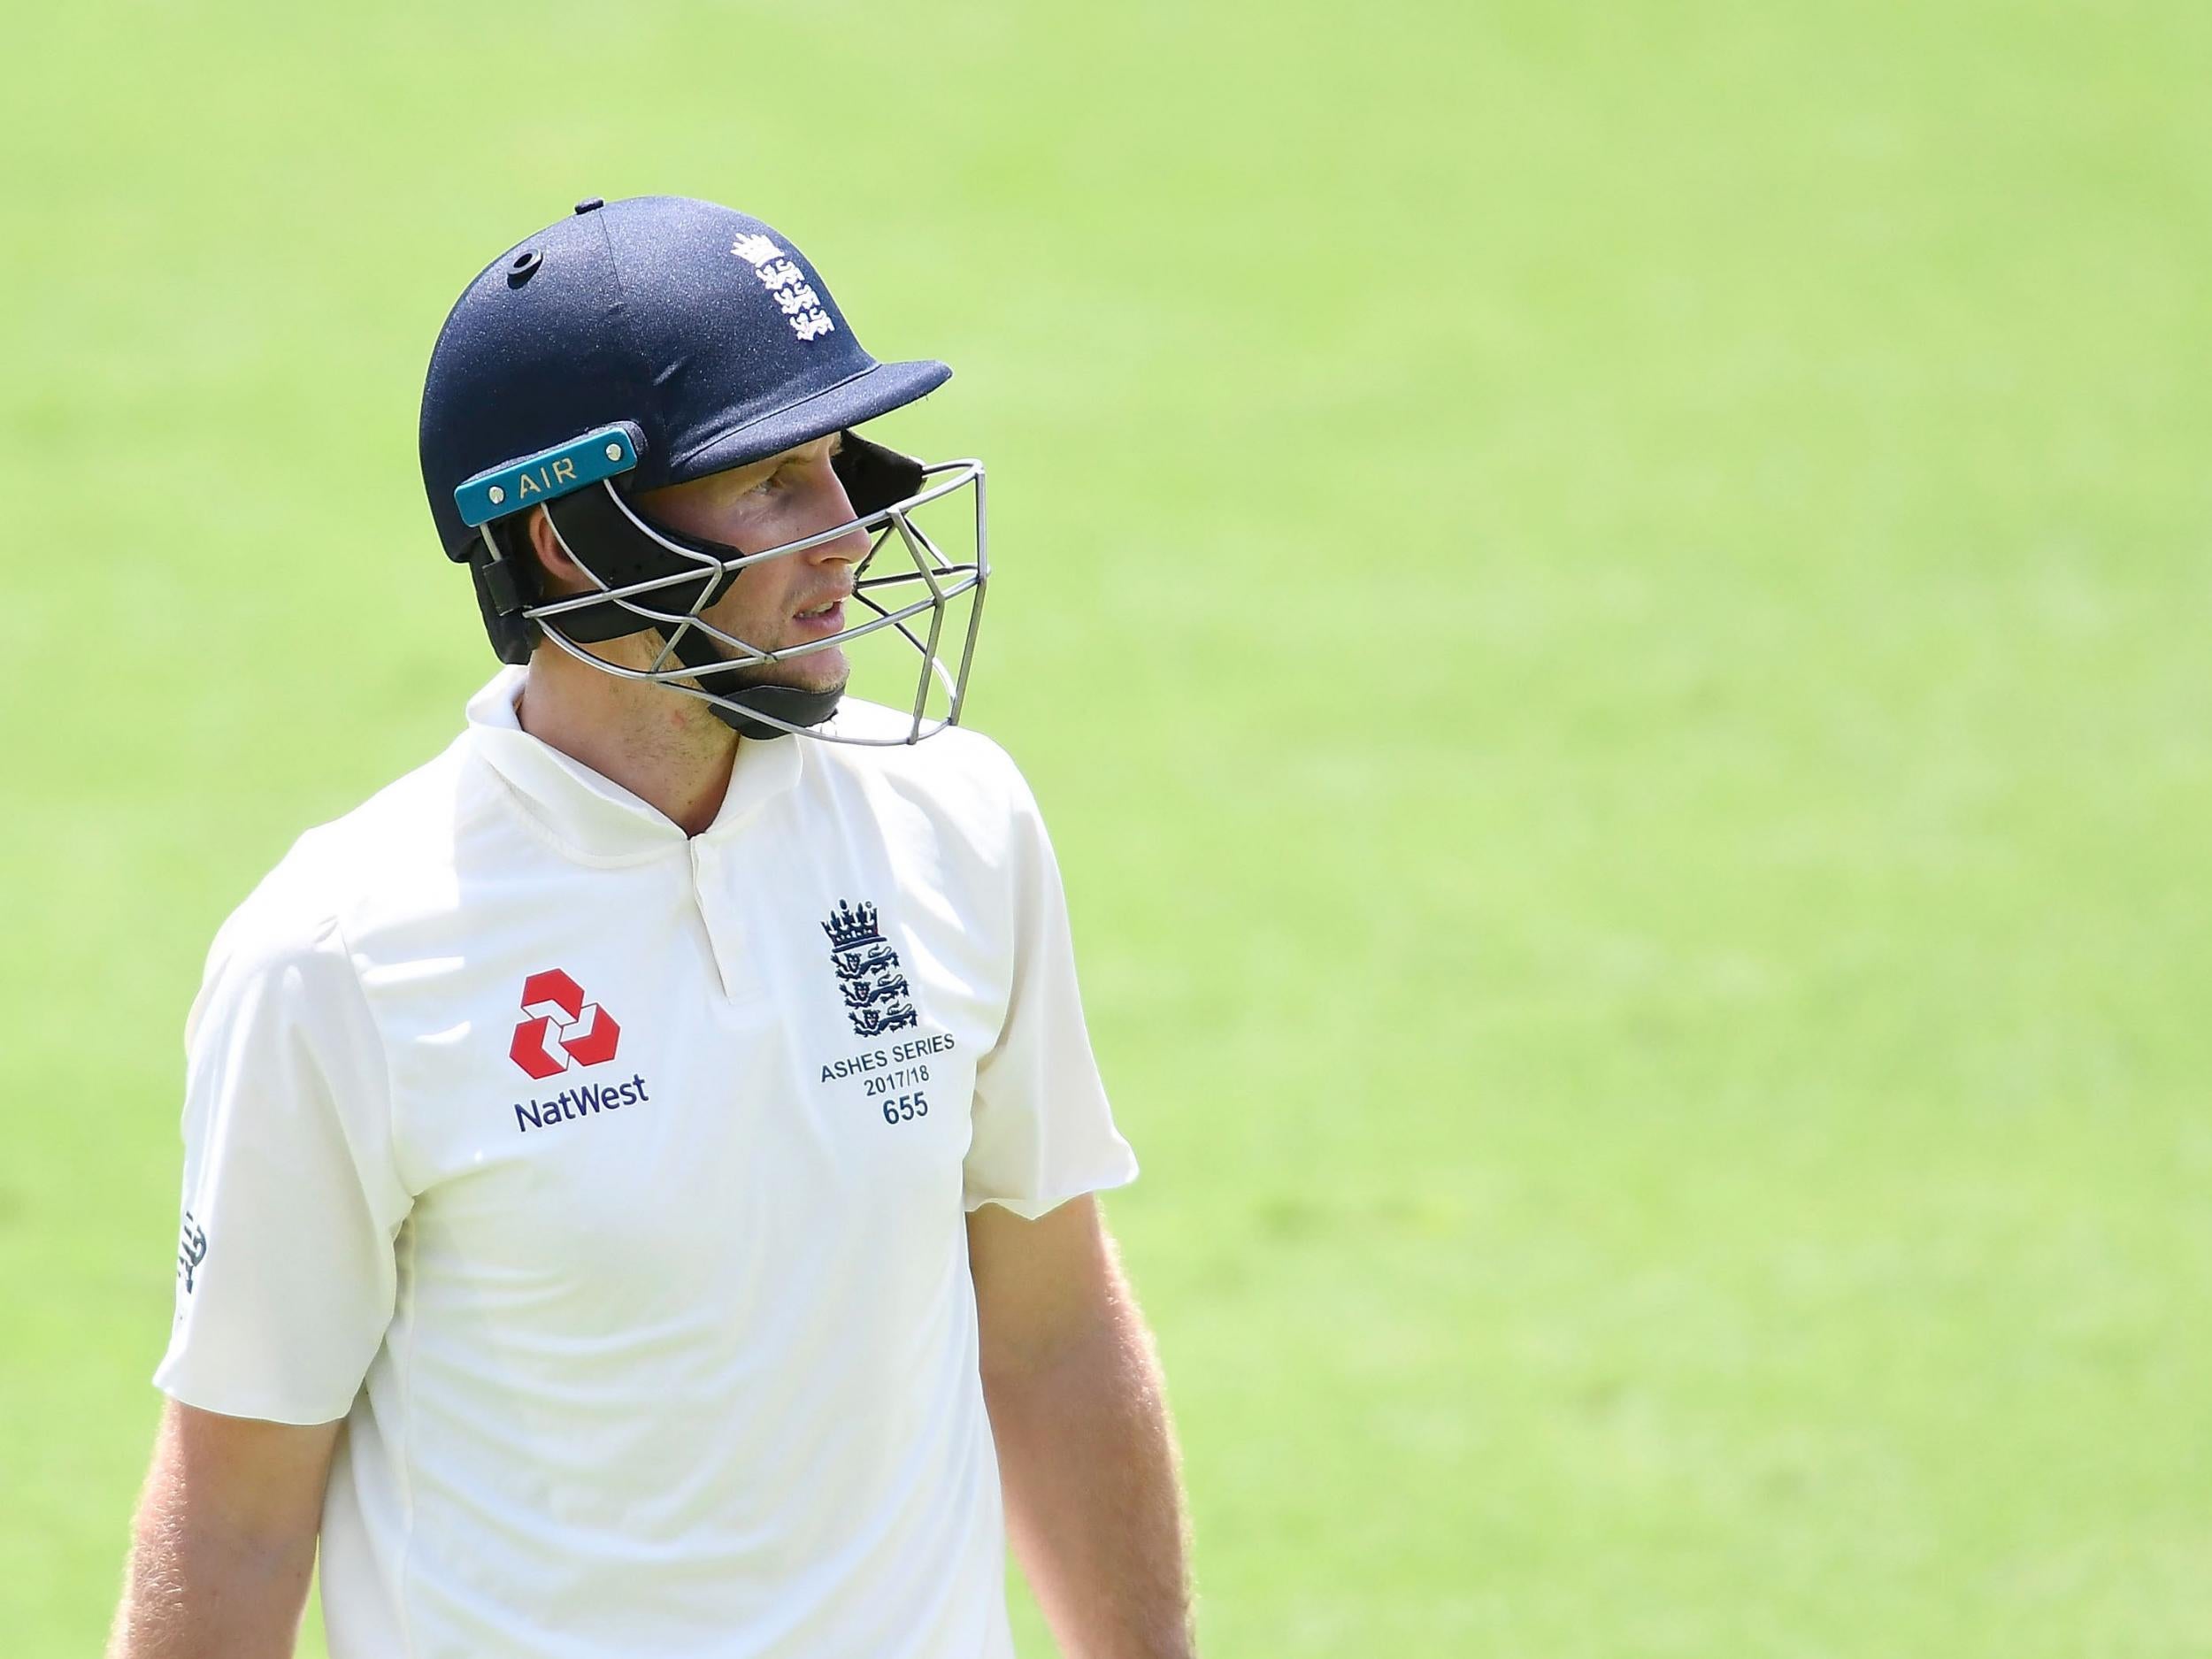 Joe Root will be worried about his side dropping off